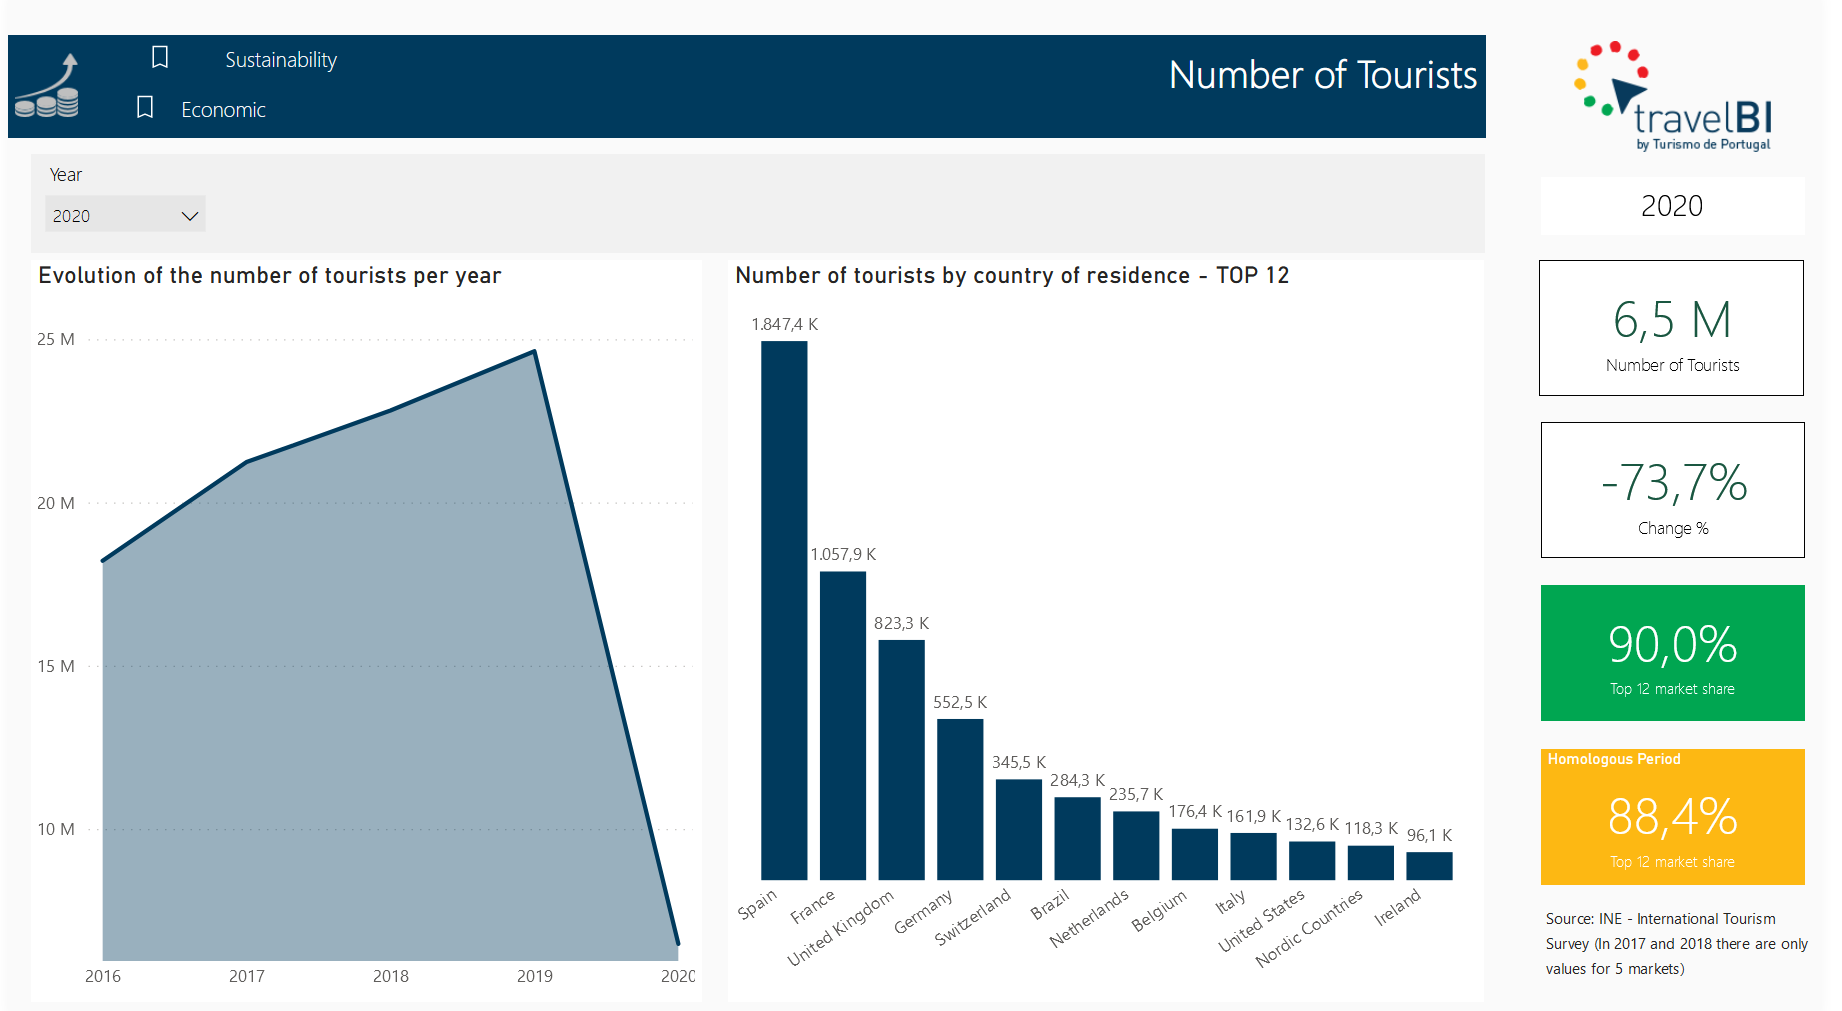 Number of Tourists